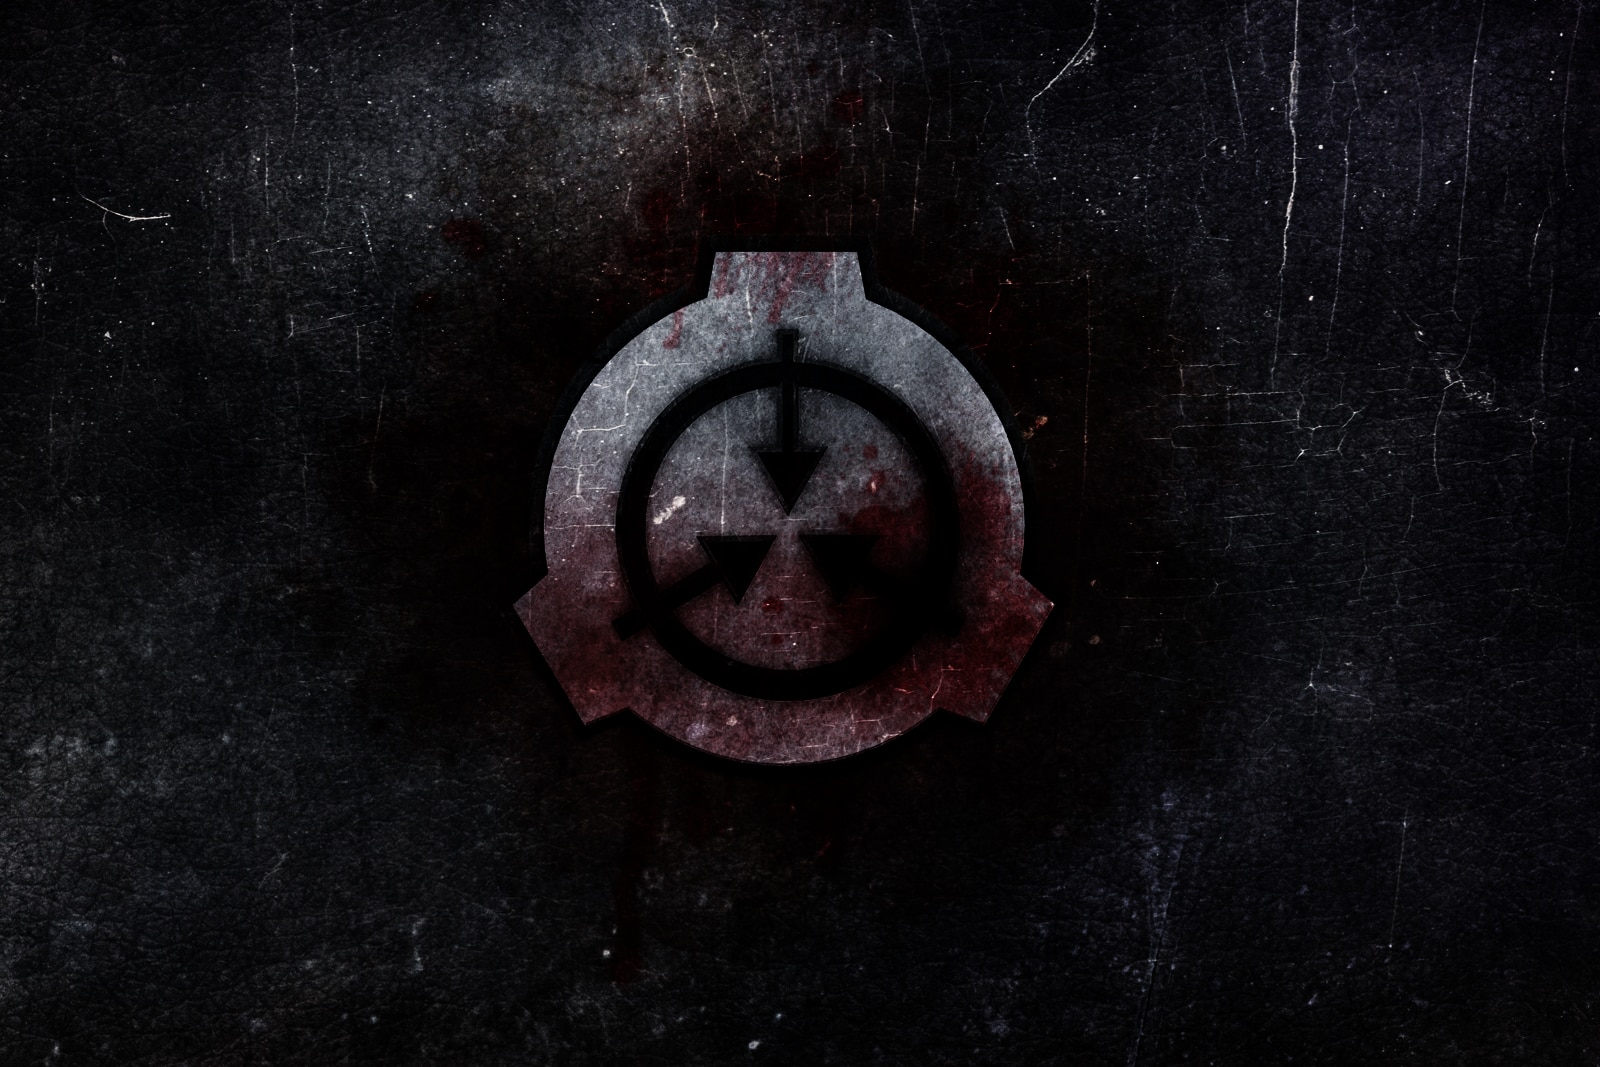 SCP – Containment Breach SCP Foundation SCP-087 Secure copy Wiki, others,  emblem, logo, video Game png